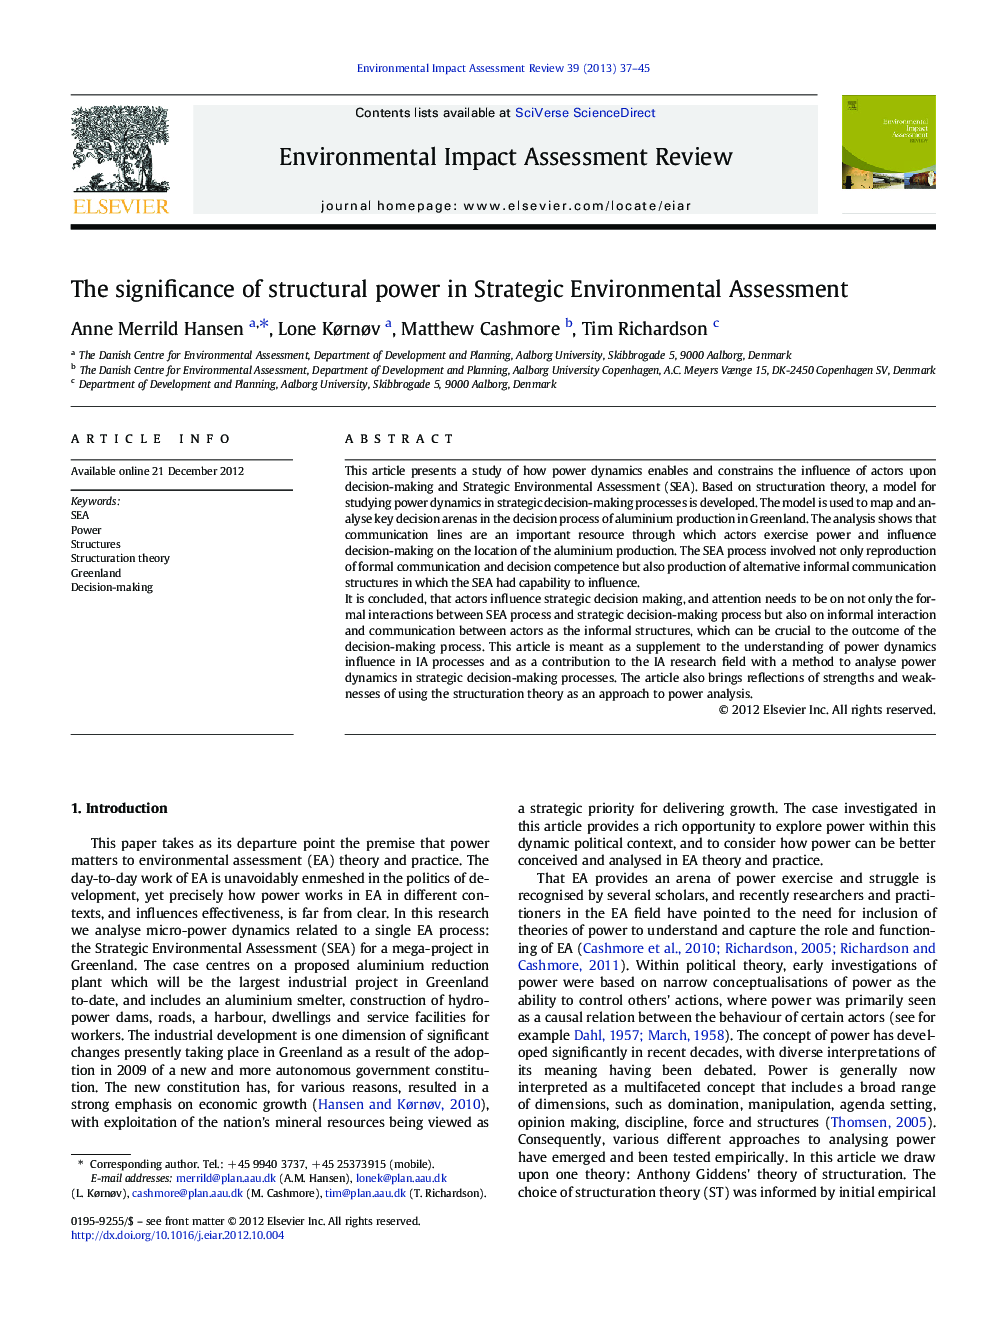 The significance of structural power in Strategic Environmental Assessment